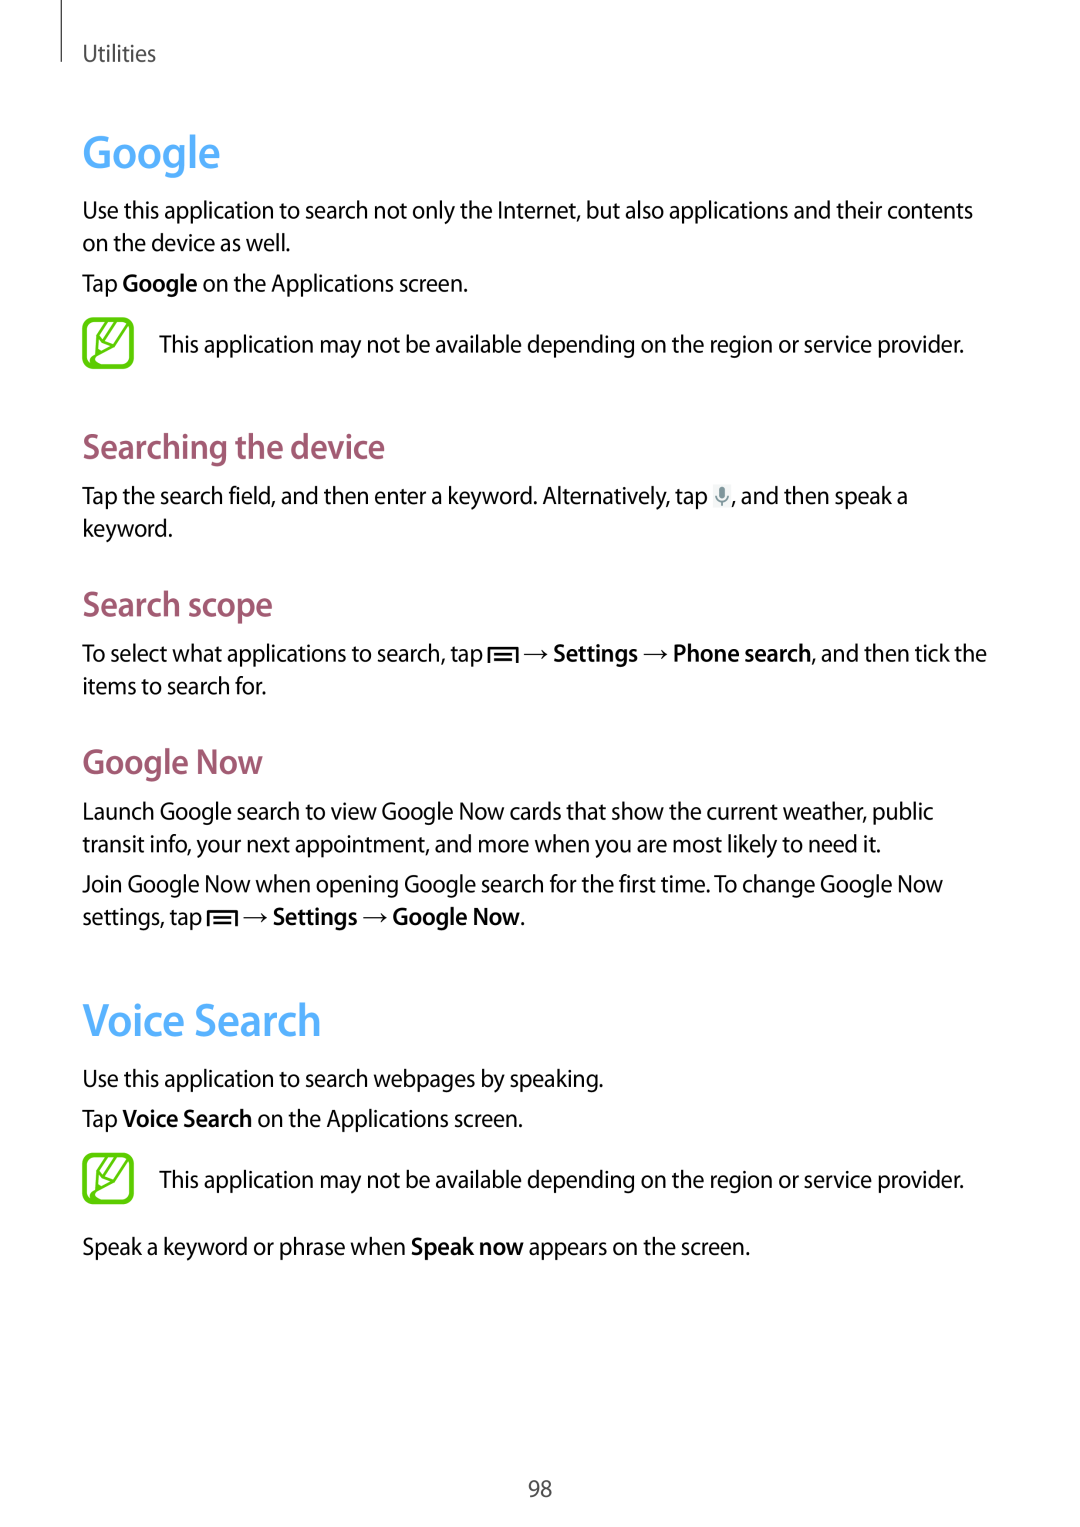 Samsung SM-G7102VBABTC, SM-G7102ZDAMID manual Voice Search, Searching the device, Search scope, Google Now, Utilities 